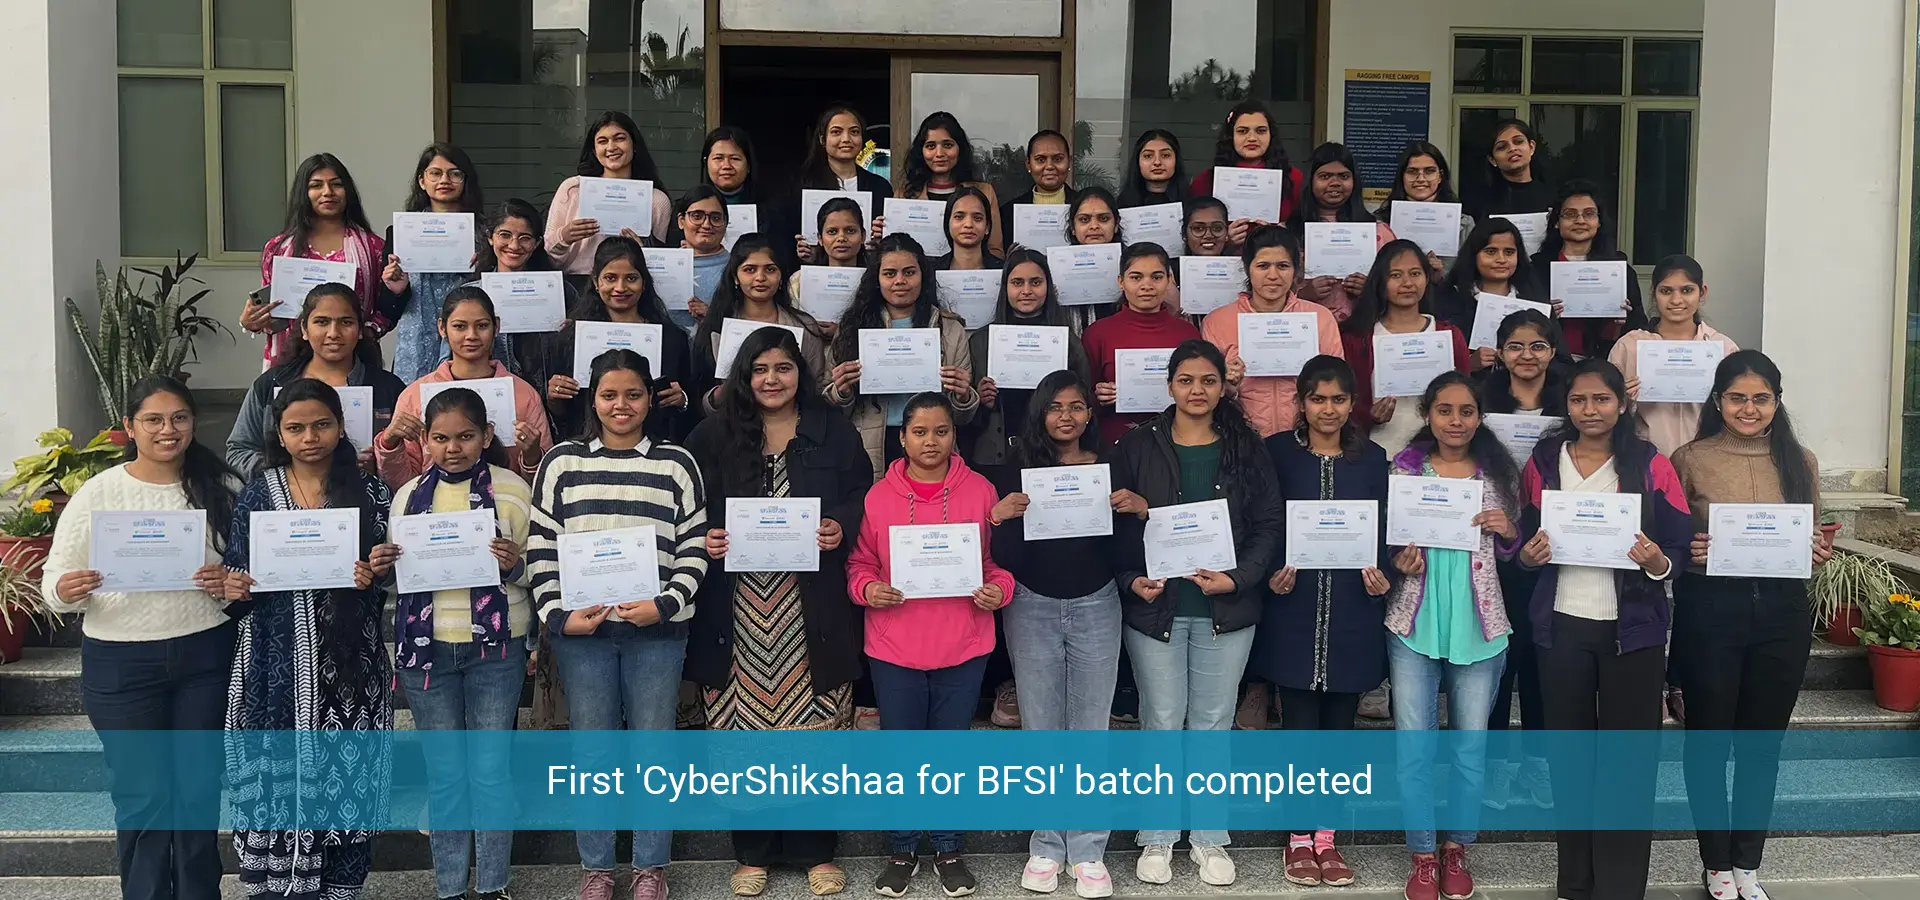 First 'CyberShikshaa for BFSI' batch completed